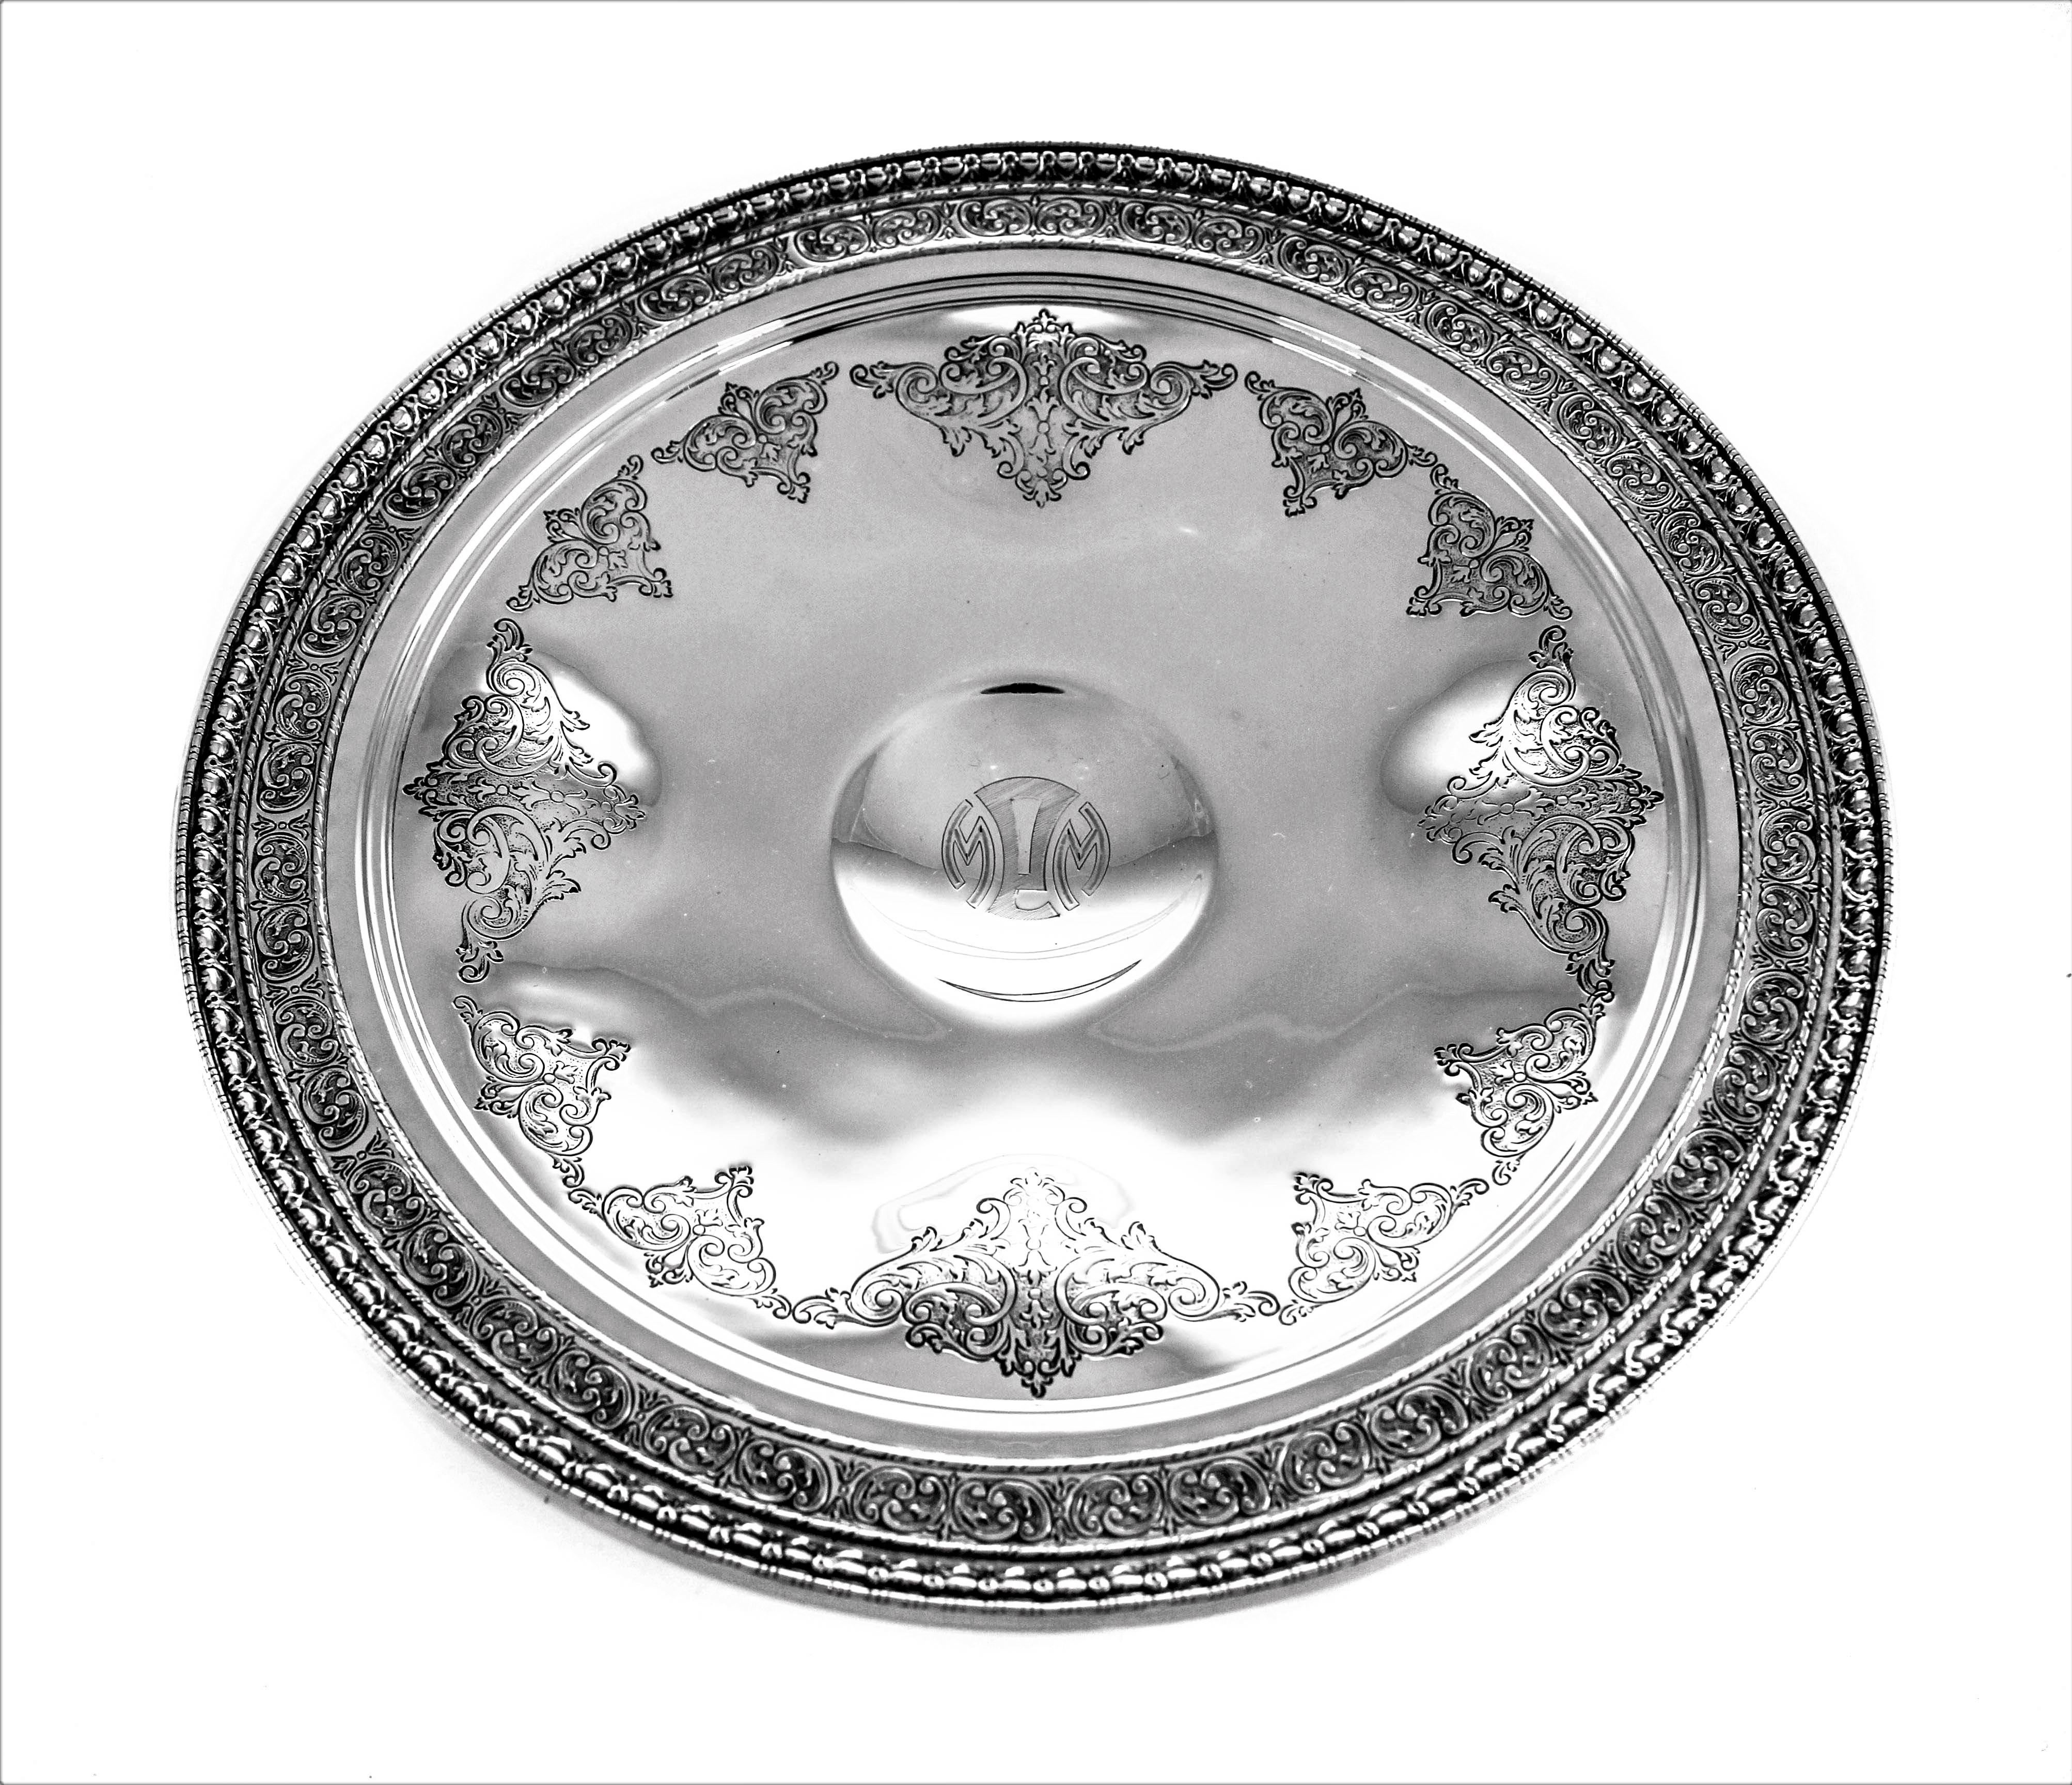 These sterling silver compotes have old-world charm to them. A rich motif of paisley shaped etchings decorate the entire edge. In the centre a fluted design with more etchings and fine details. The tops are flat enough so you can put cookies or